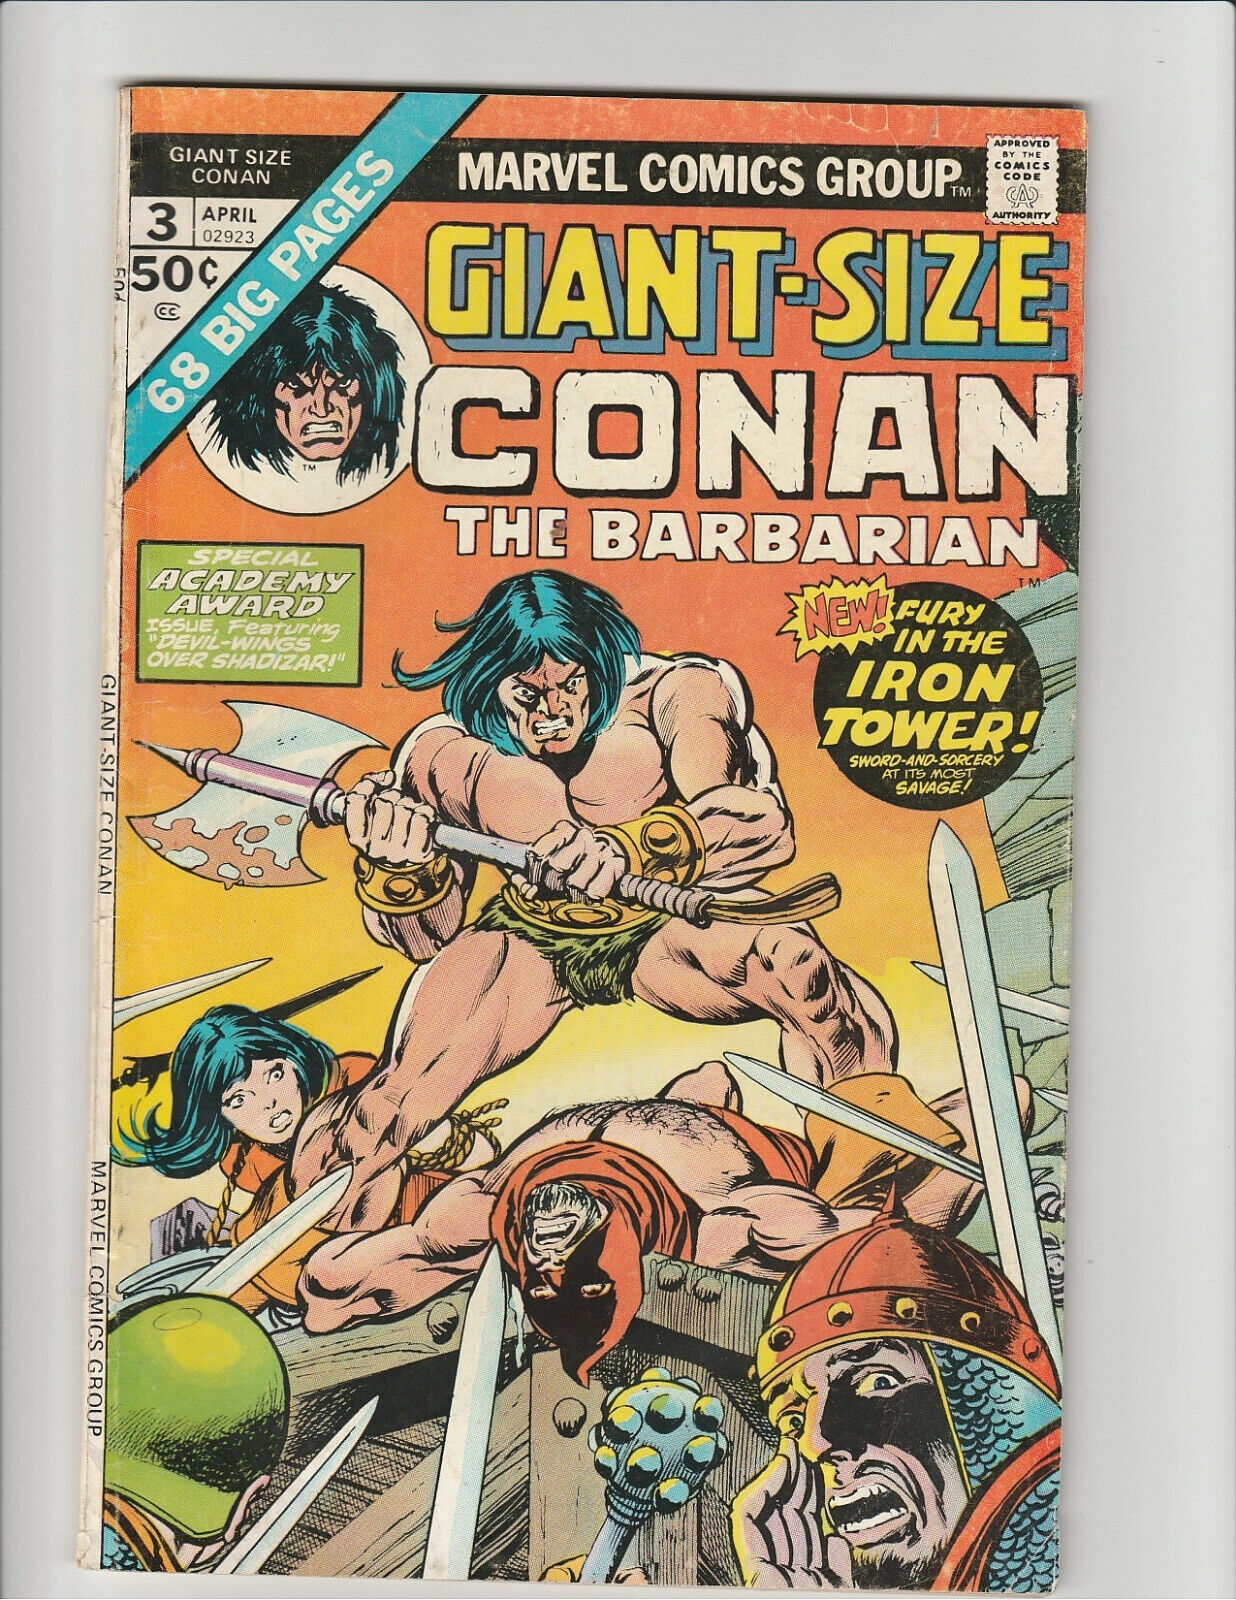 Giant Size Conan the Barbarian #3 FN- 5.5 1975 Marvel Comics Iron Tower 1975